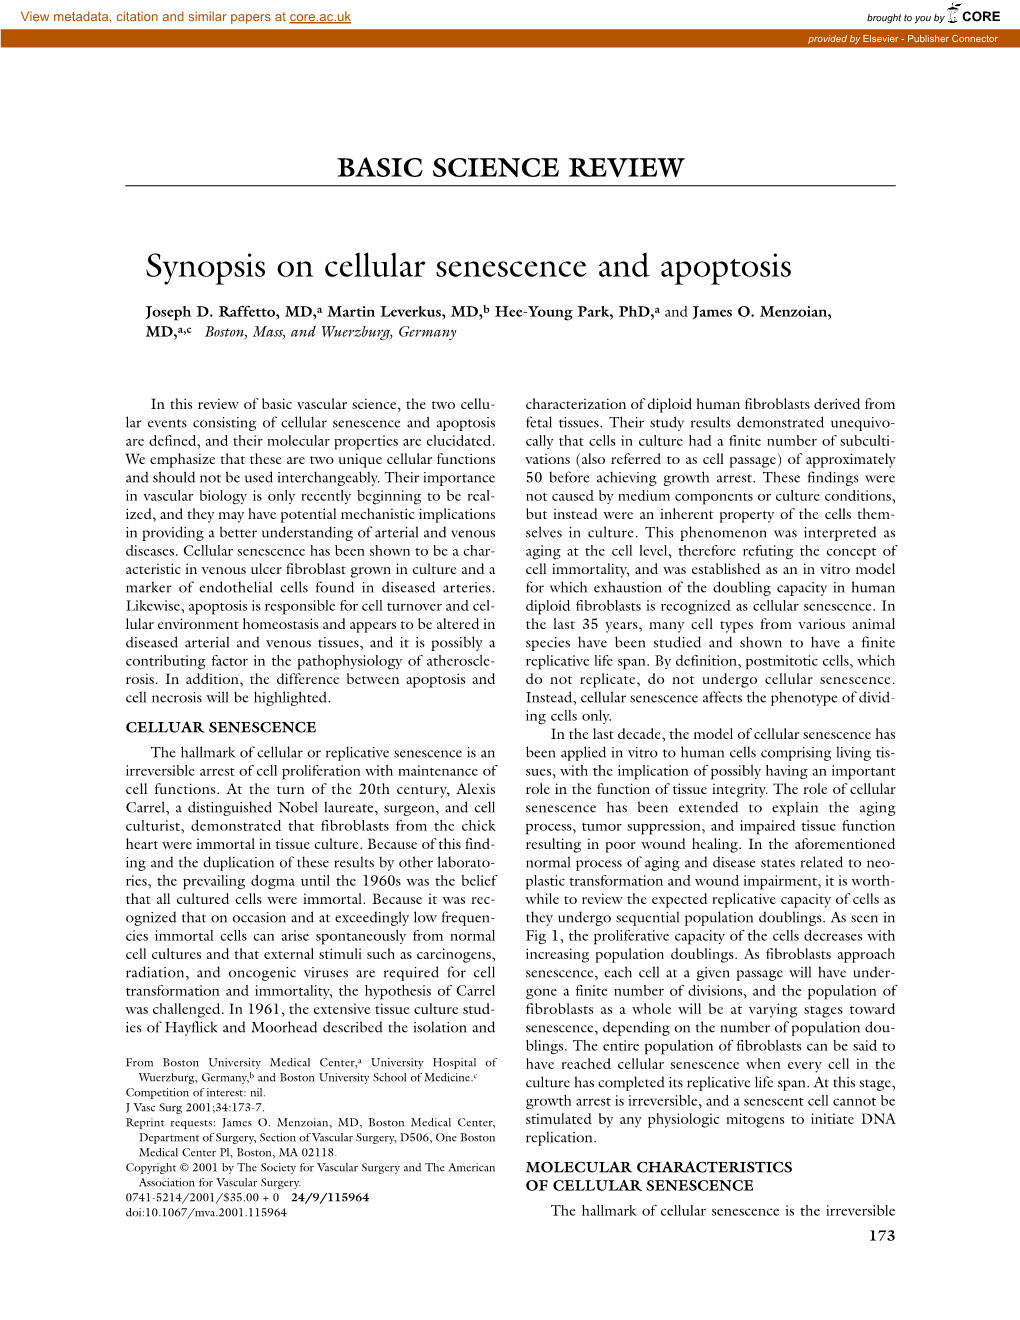 Synopsis on Cellular Senescence and Apoptosis